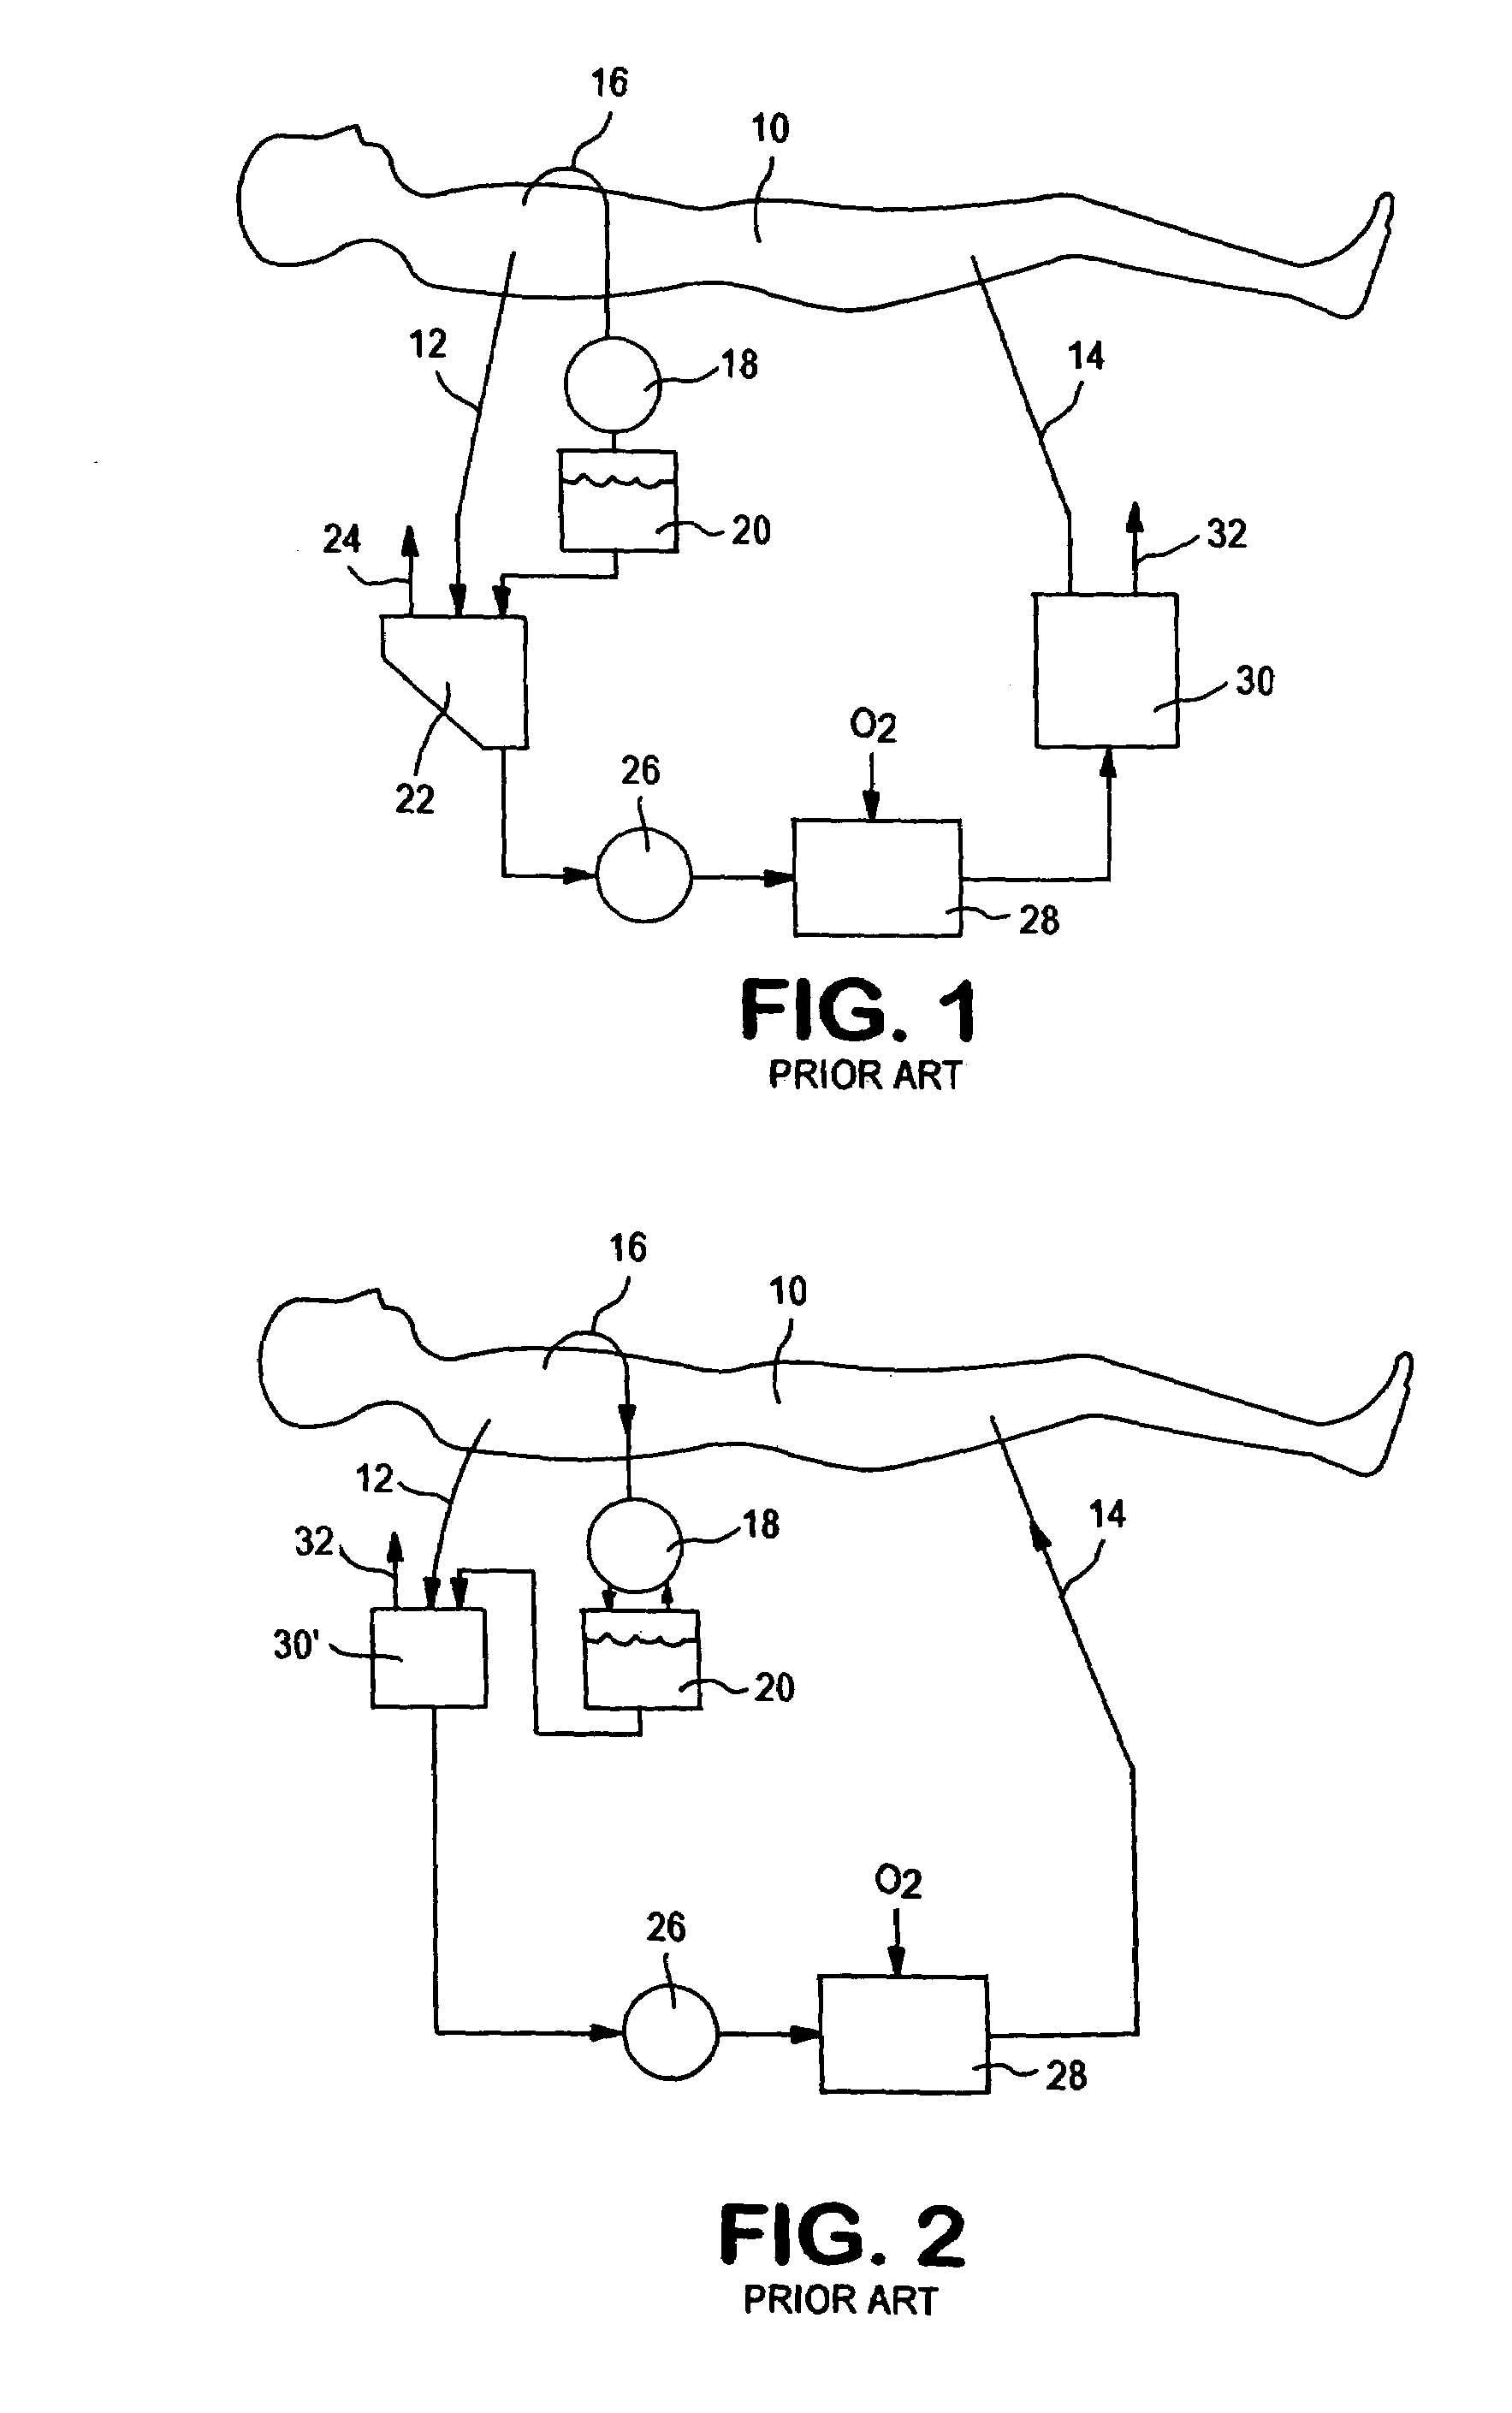 Active air removal system operating modes of an extracorporeal blood circuit